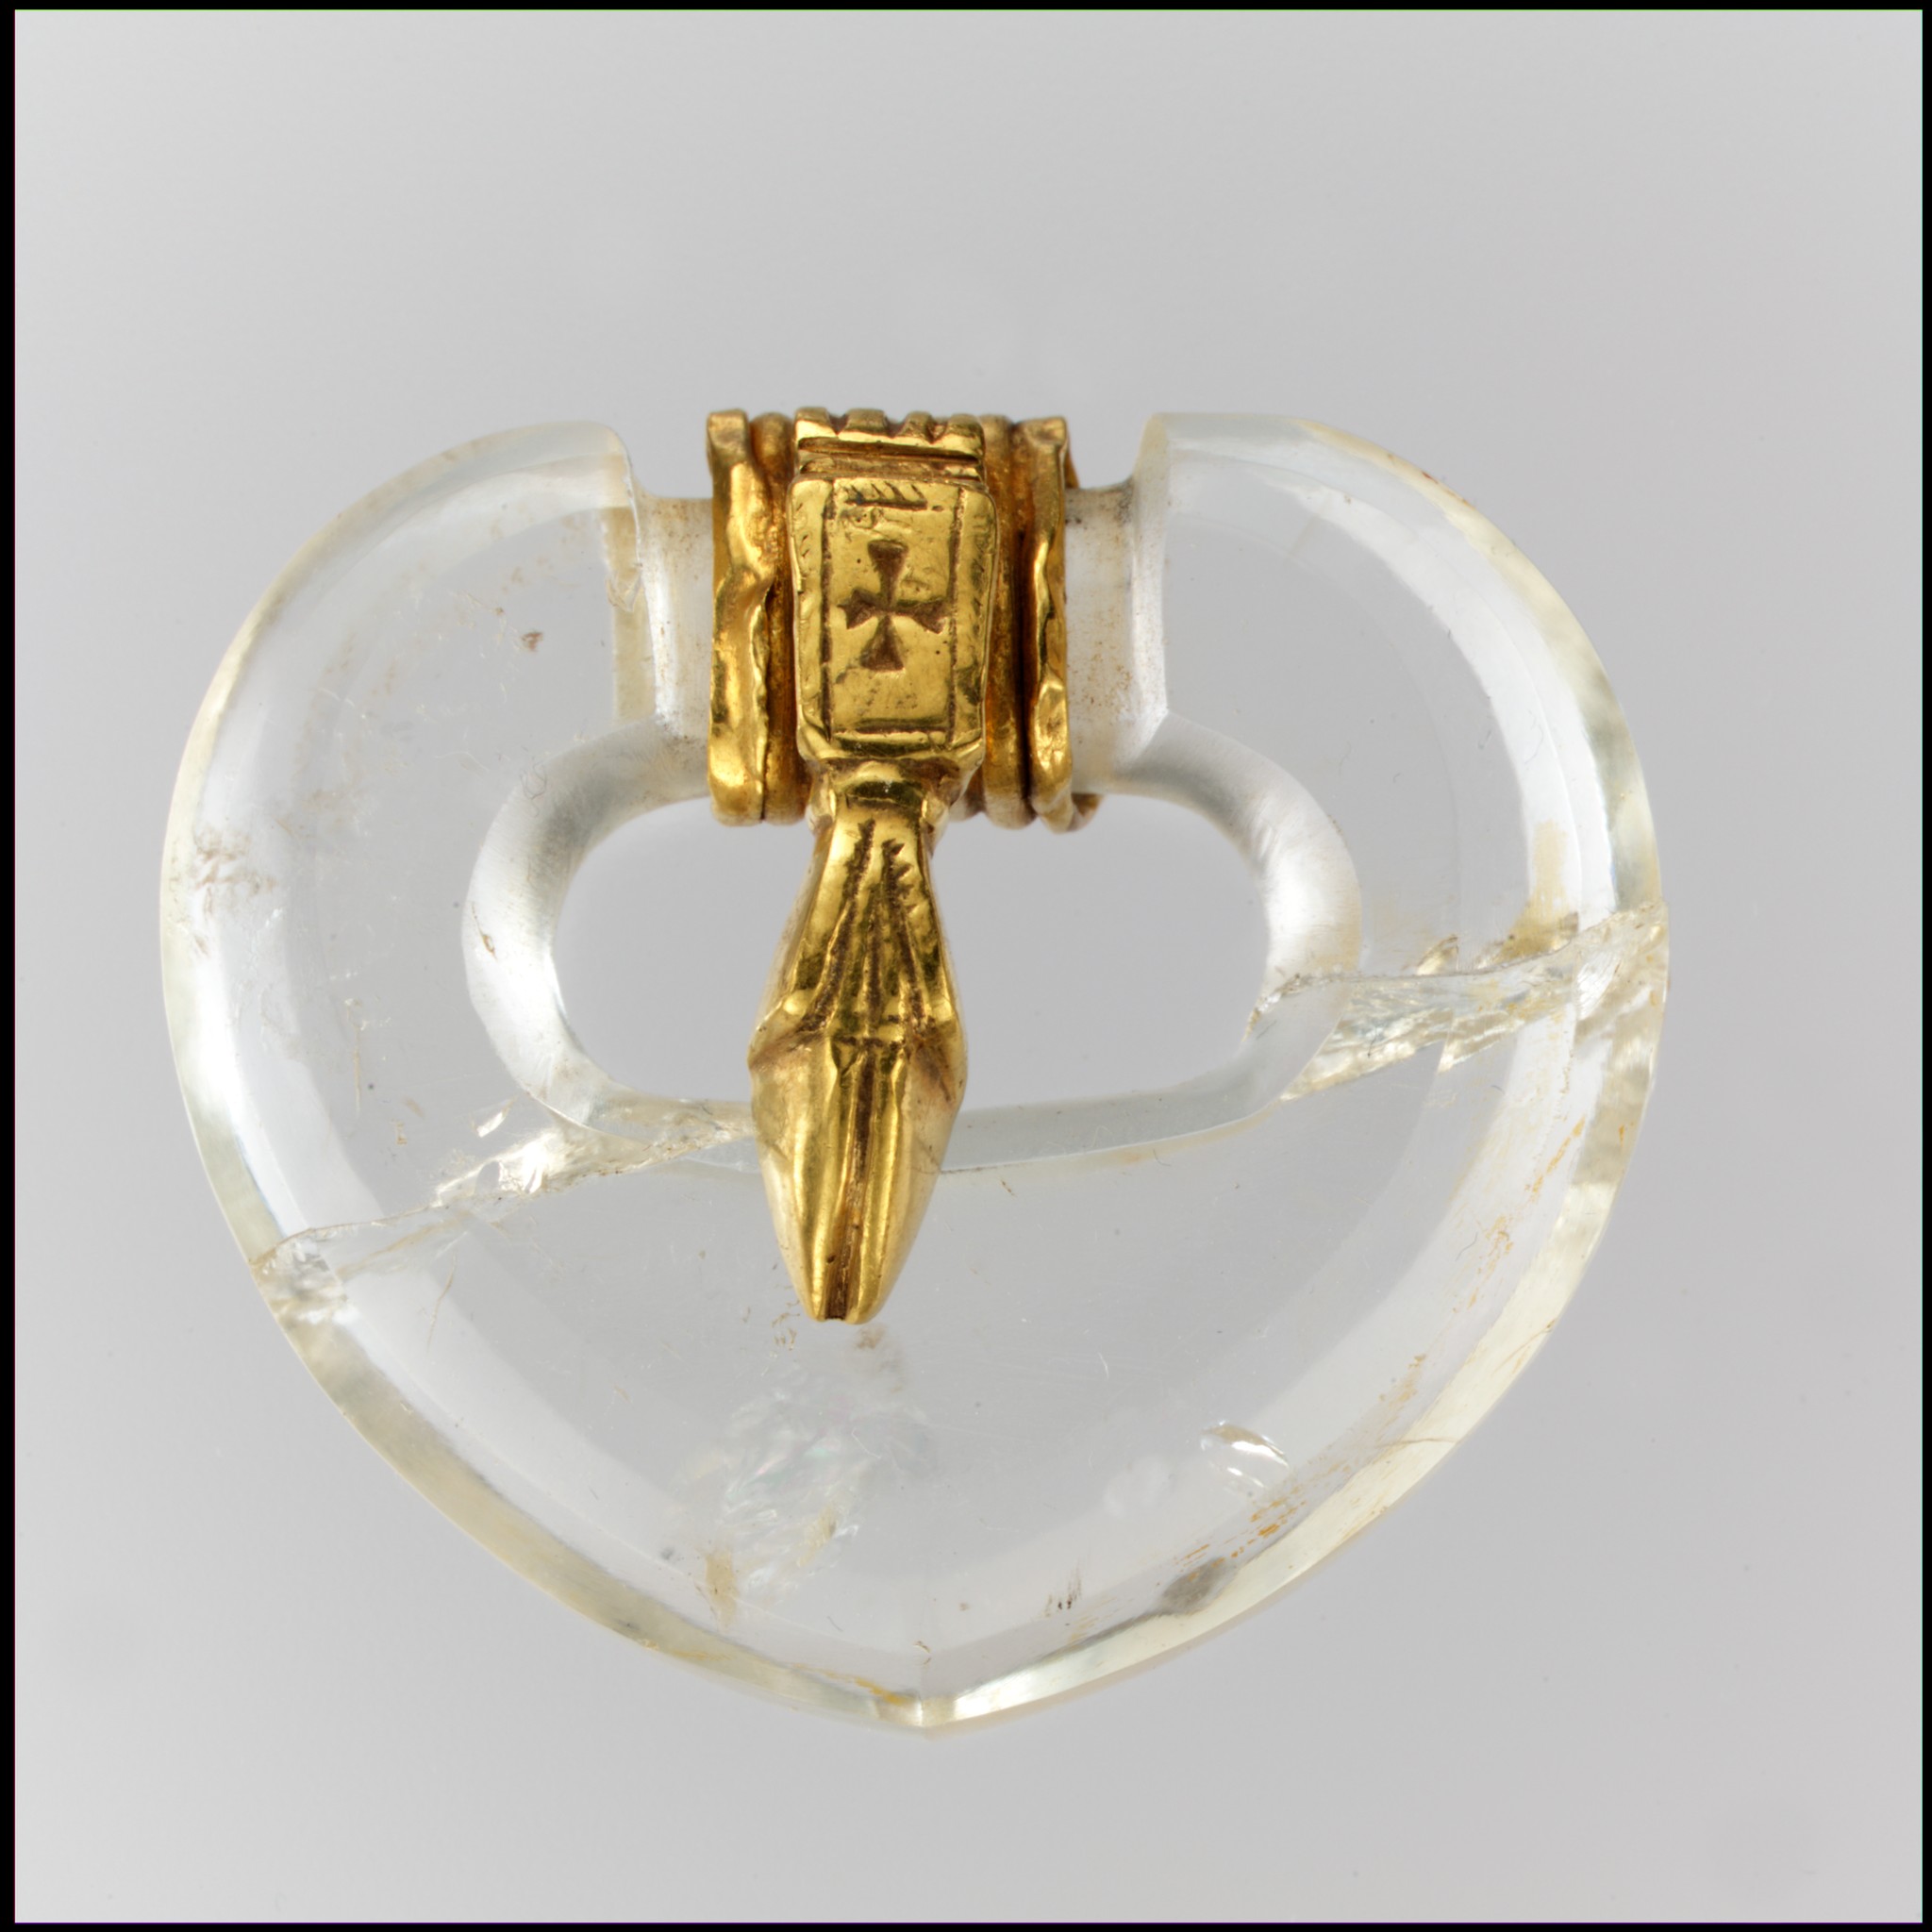 Ancient Byzantine and Germanic rock crystal and gold belt buckle, c. 500 CE.jpg